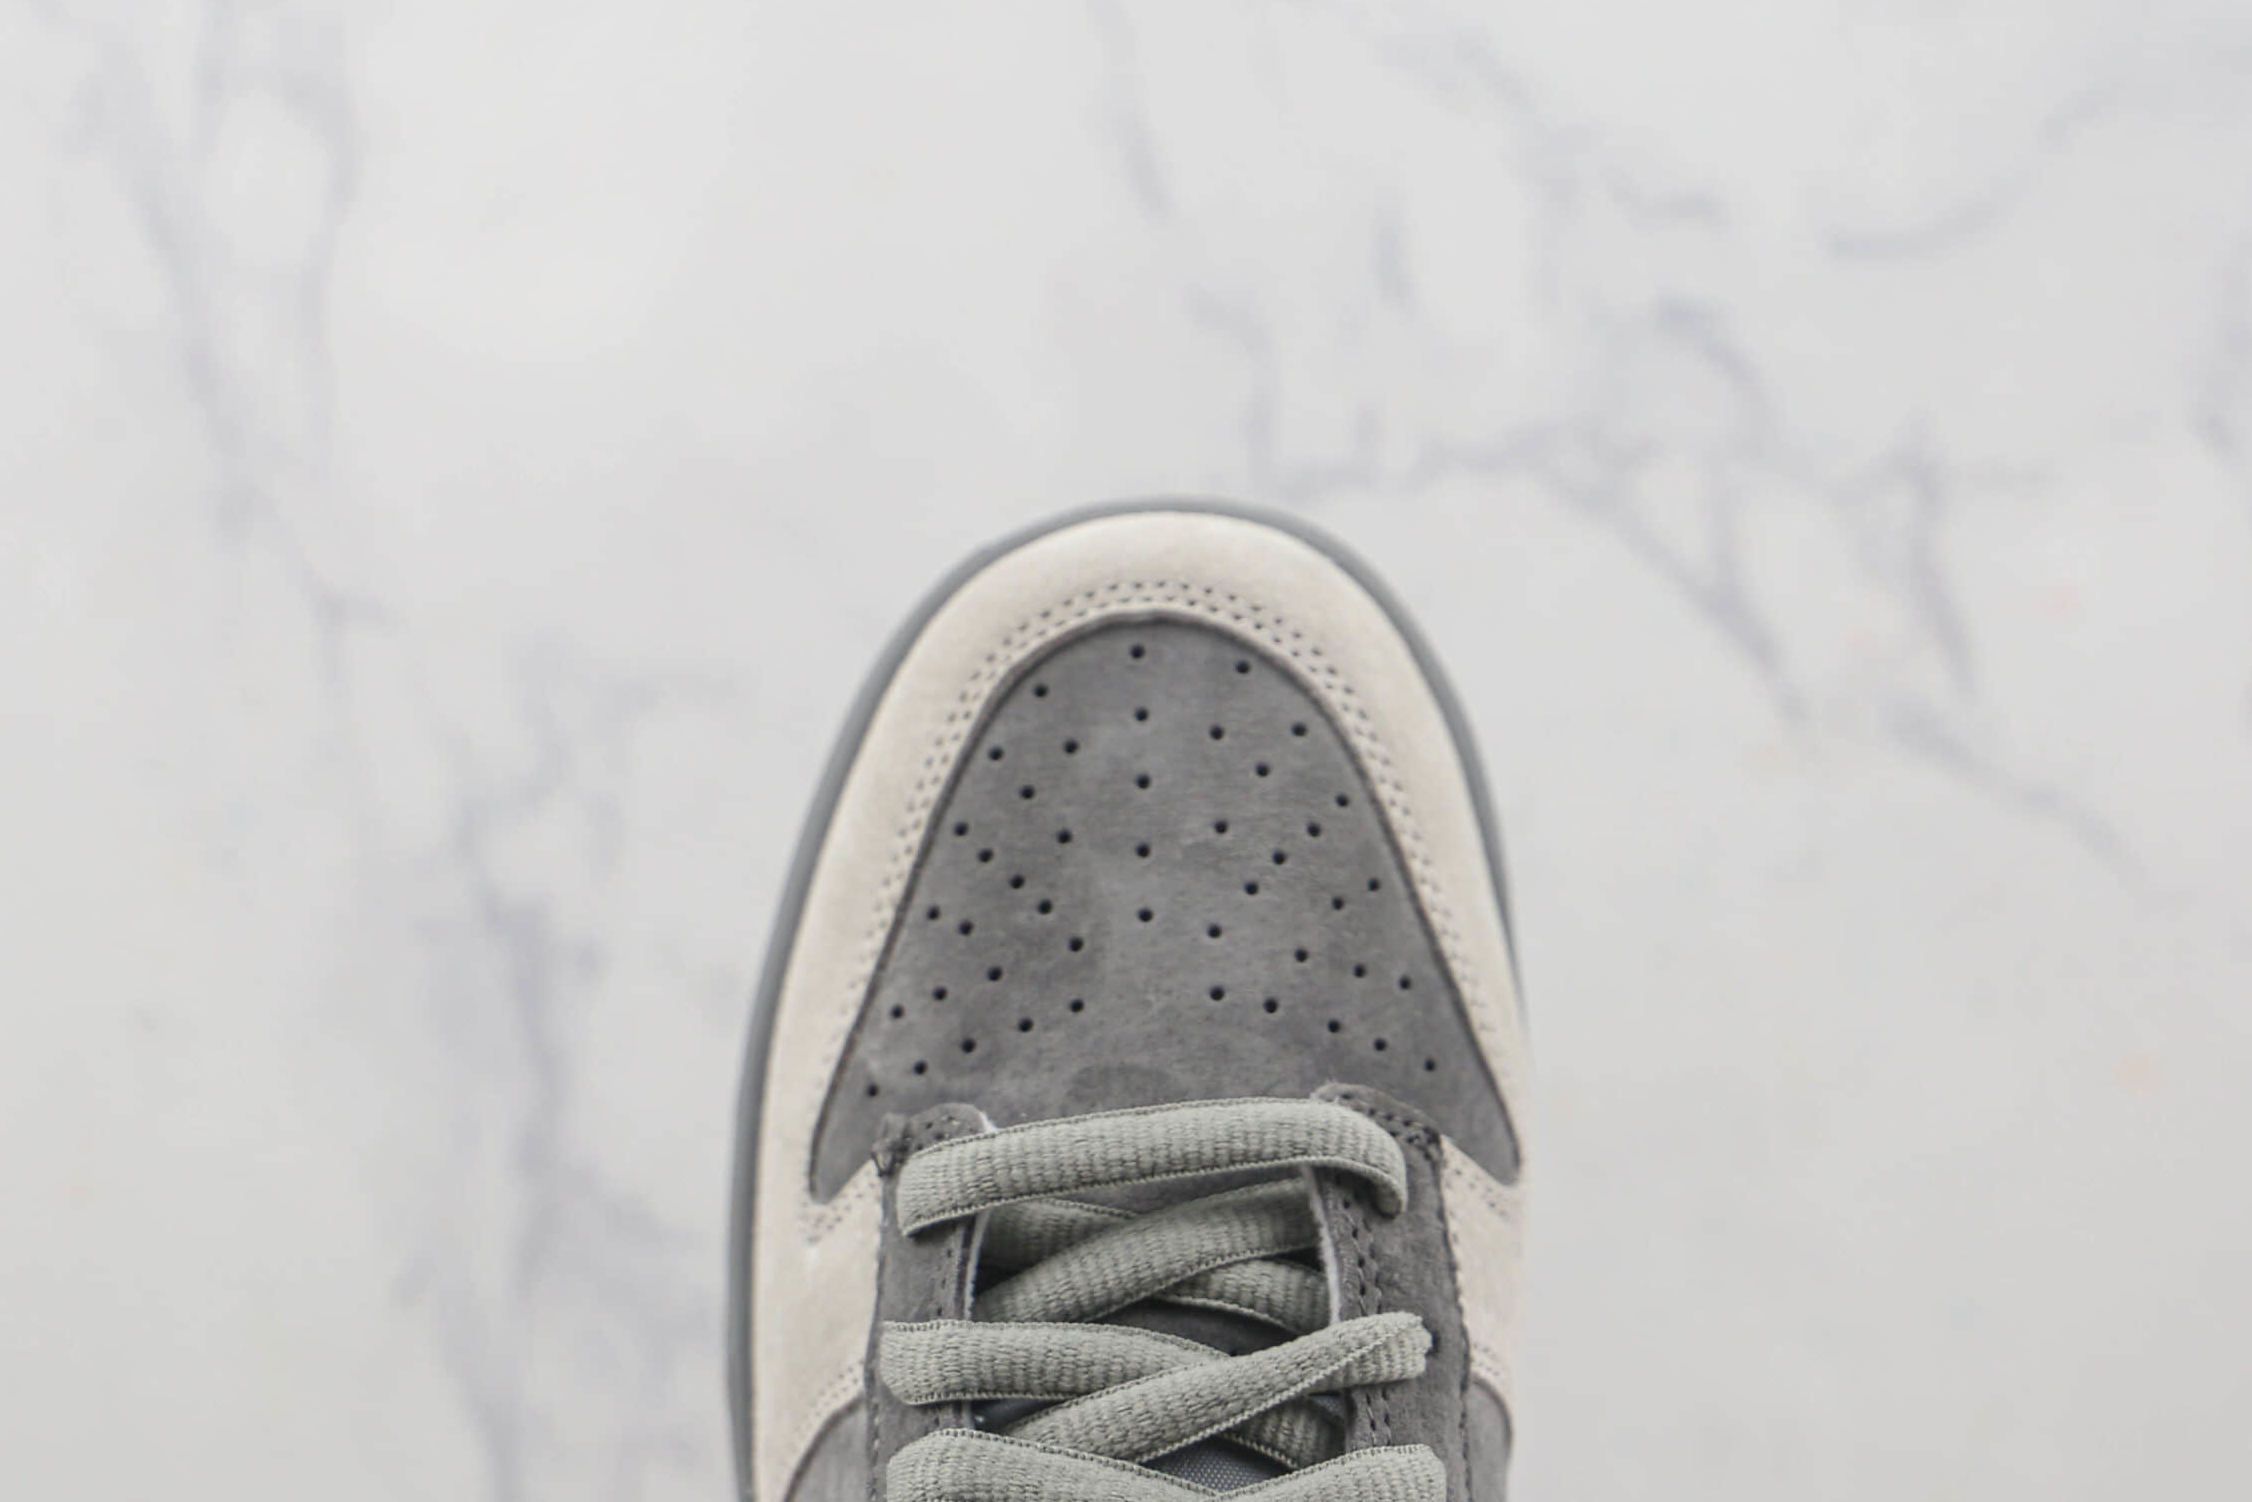 Nike Dunk SB Low Grey - Stylish and Versatile Sneakers for Men | Best Prices